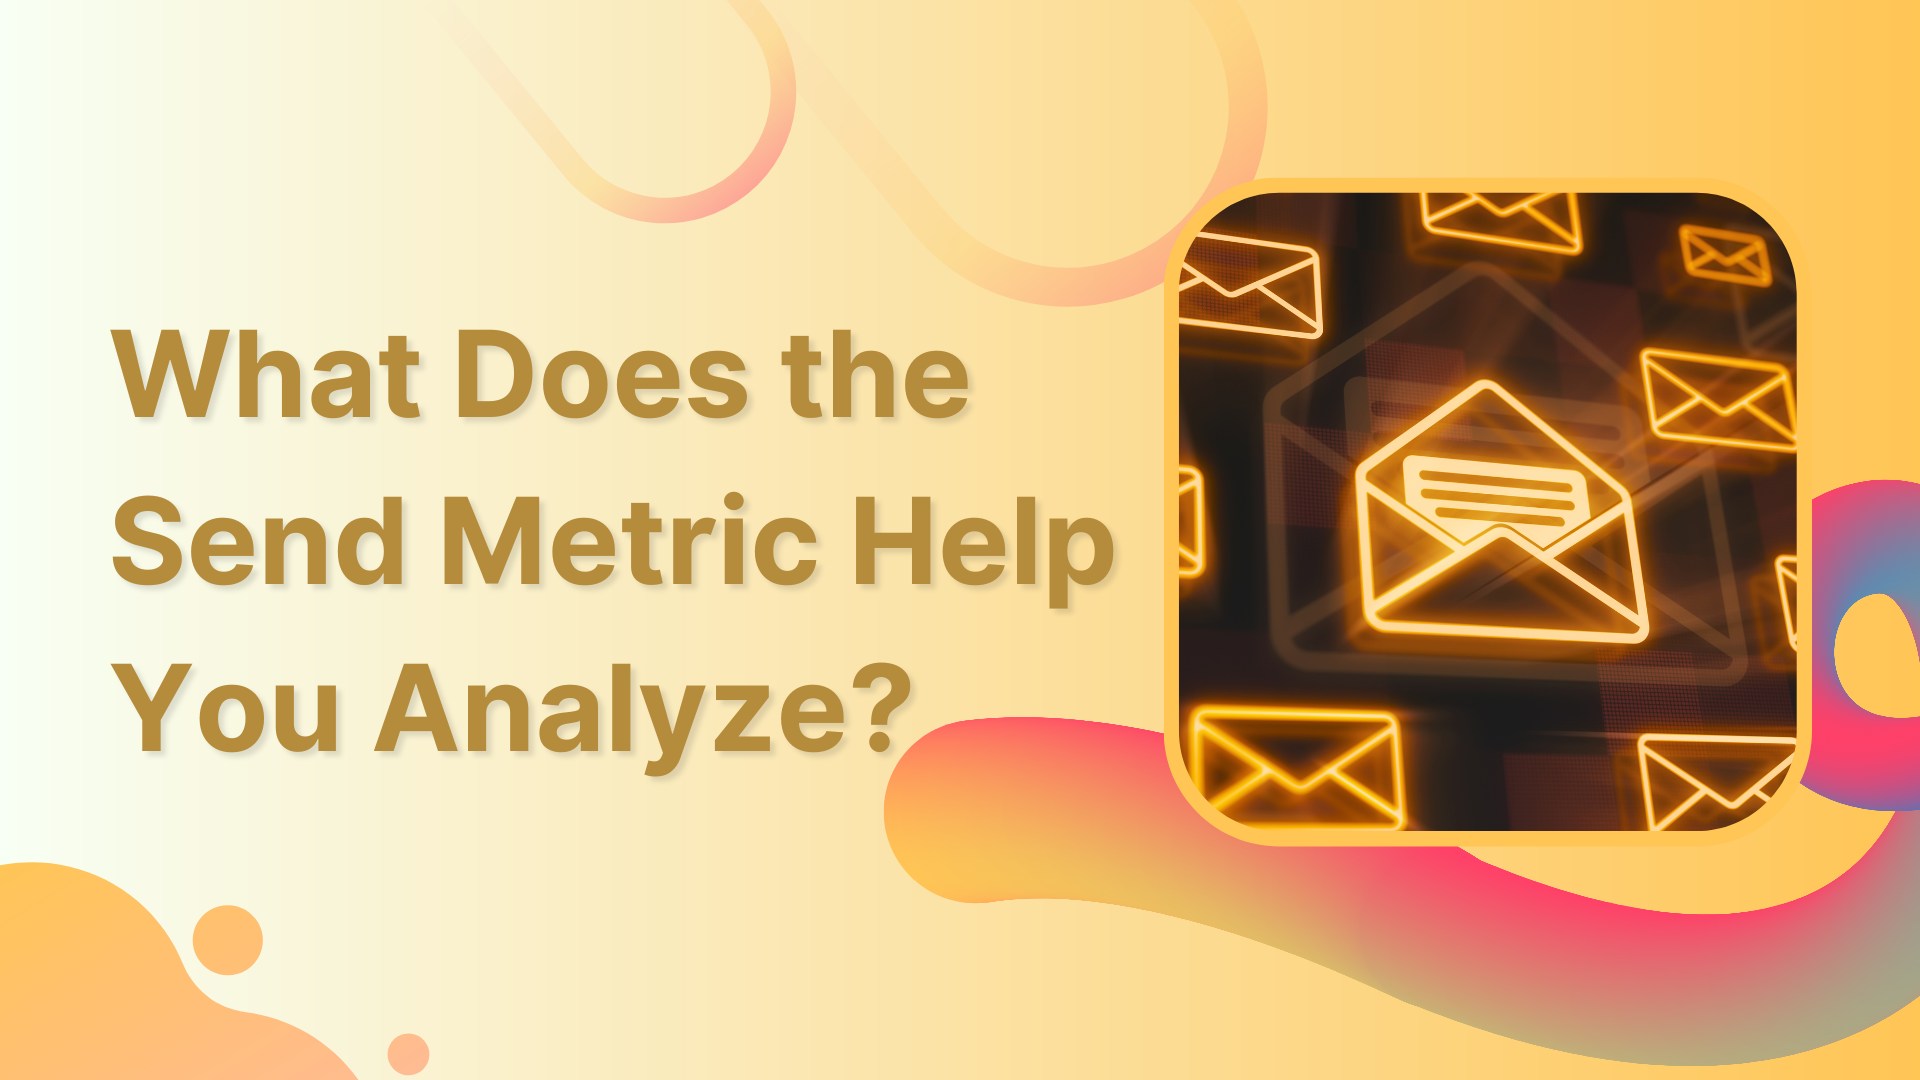 What Does the Send Metric Help You Analyze?